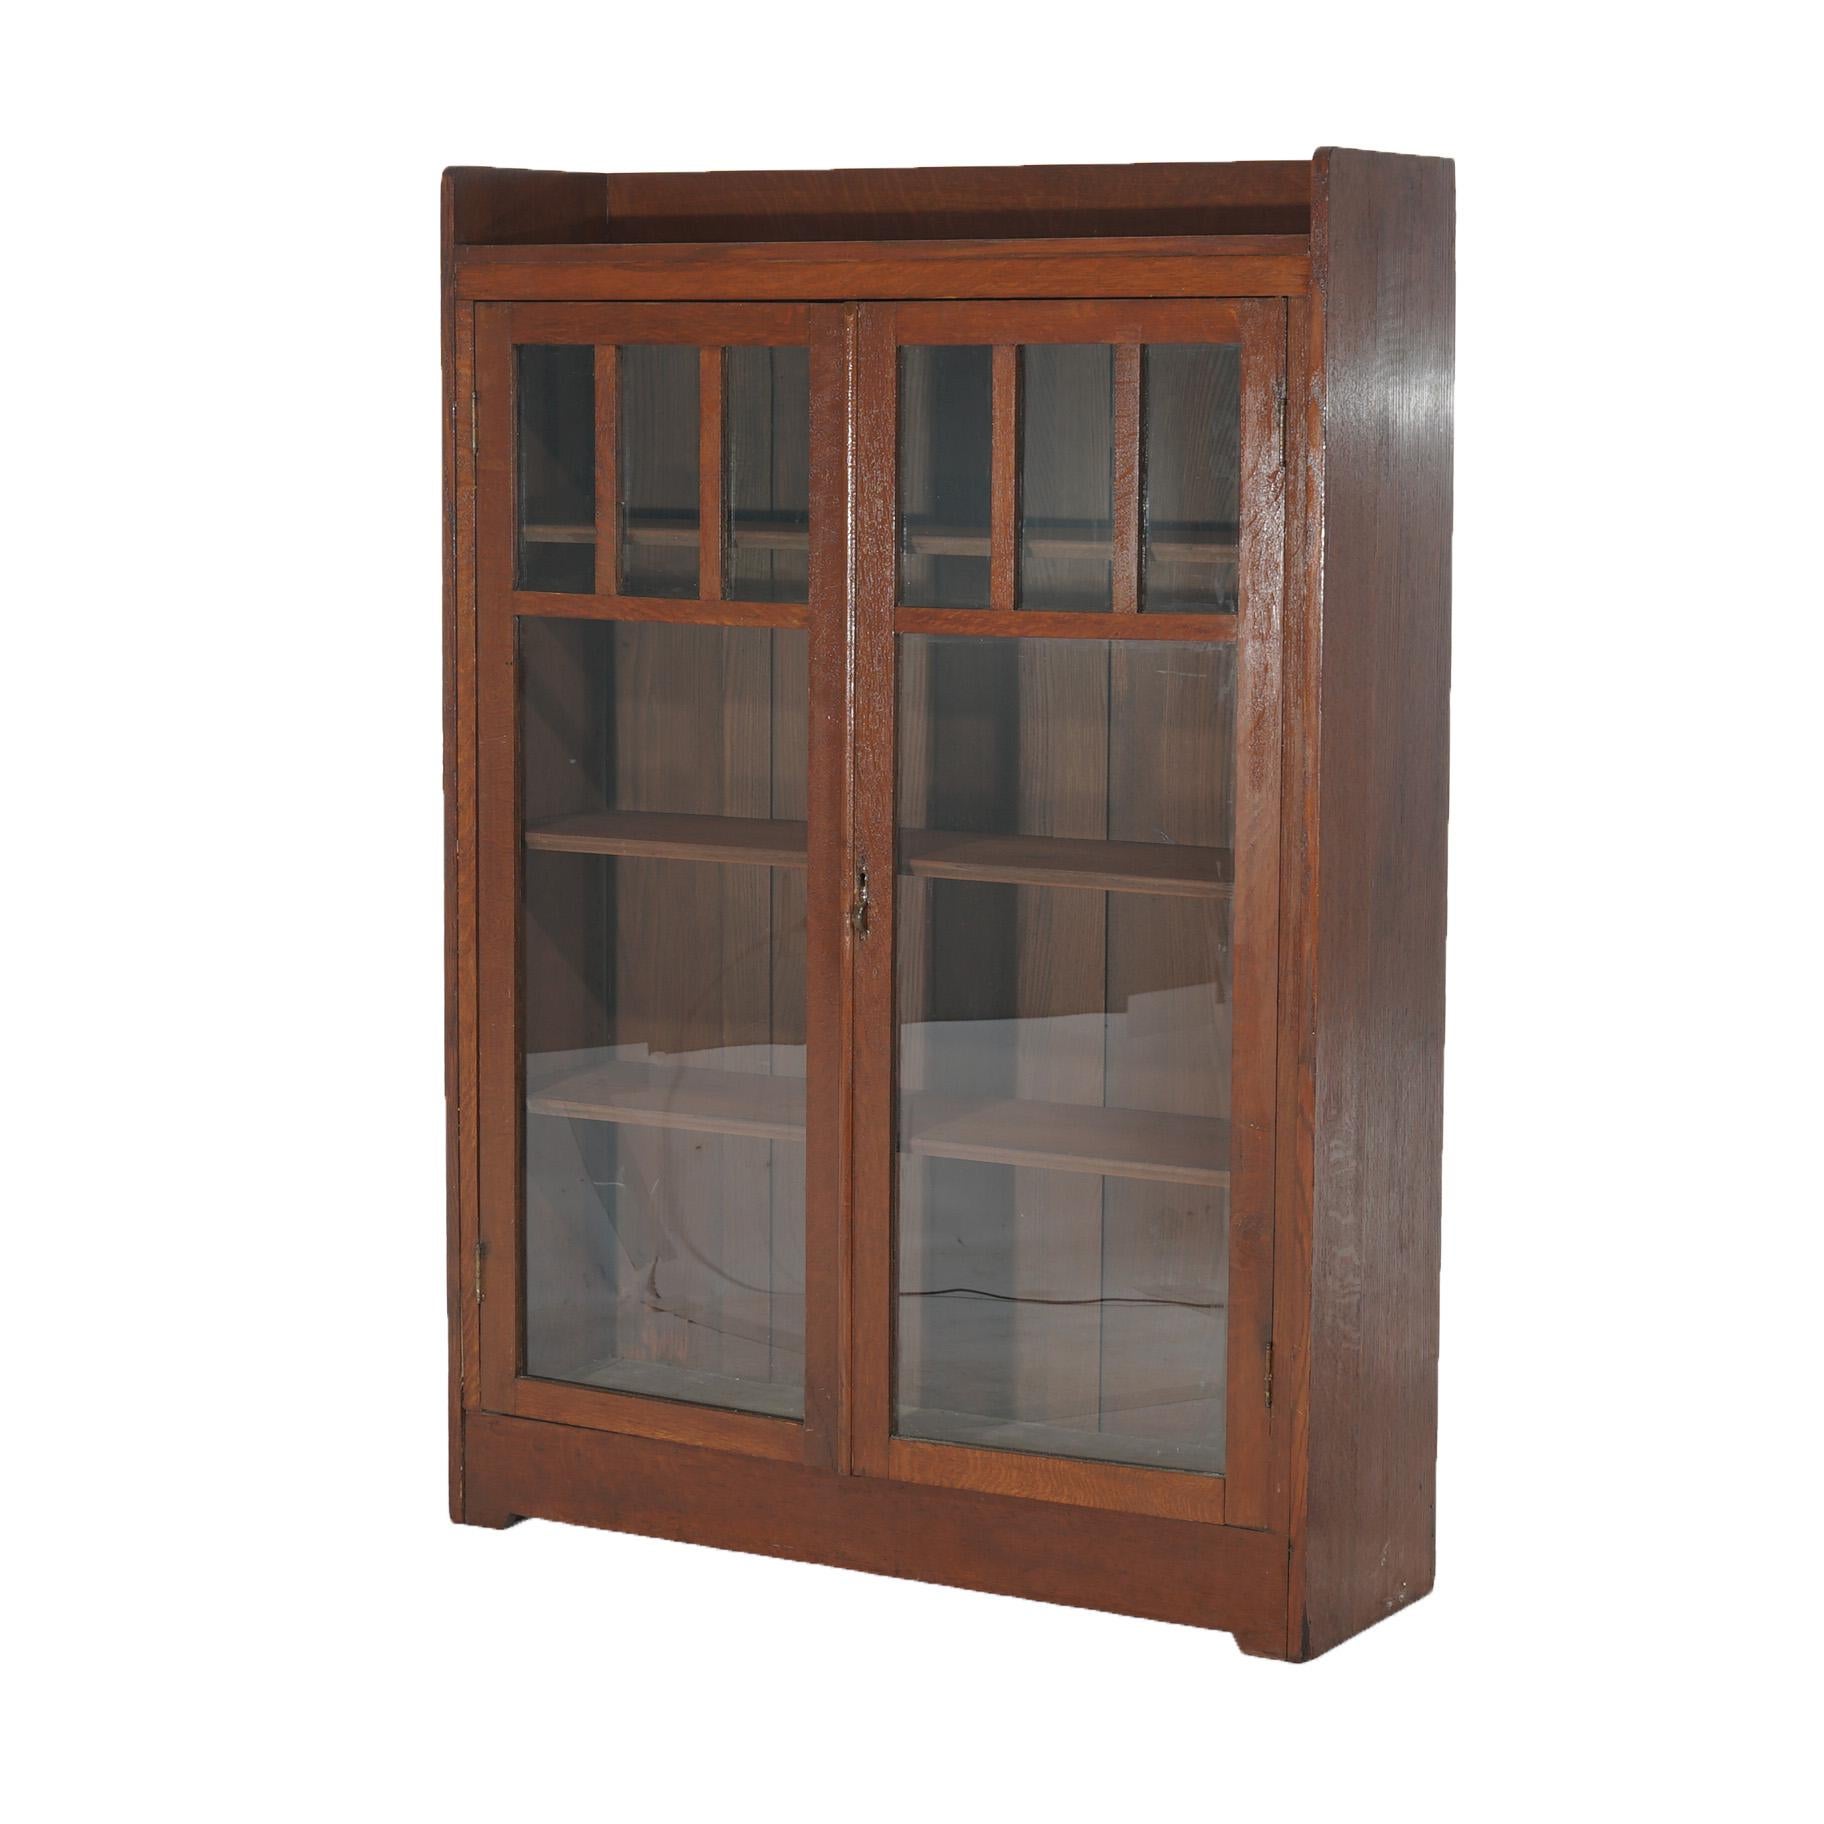 An antique Arts and Crafts Mission bookcase by Stickley offers oak construction with upper gallery surmounting lower case having double glass doors opening to shelved interior, circa 1910

Measures - 57.5